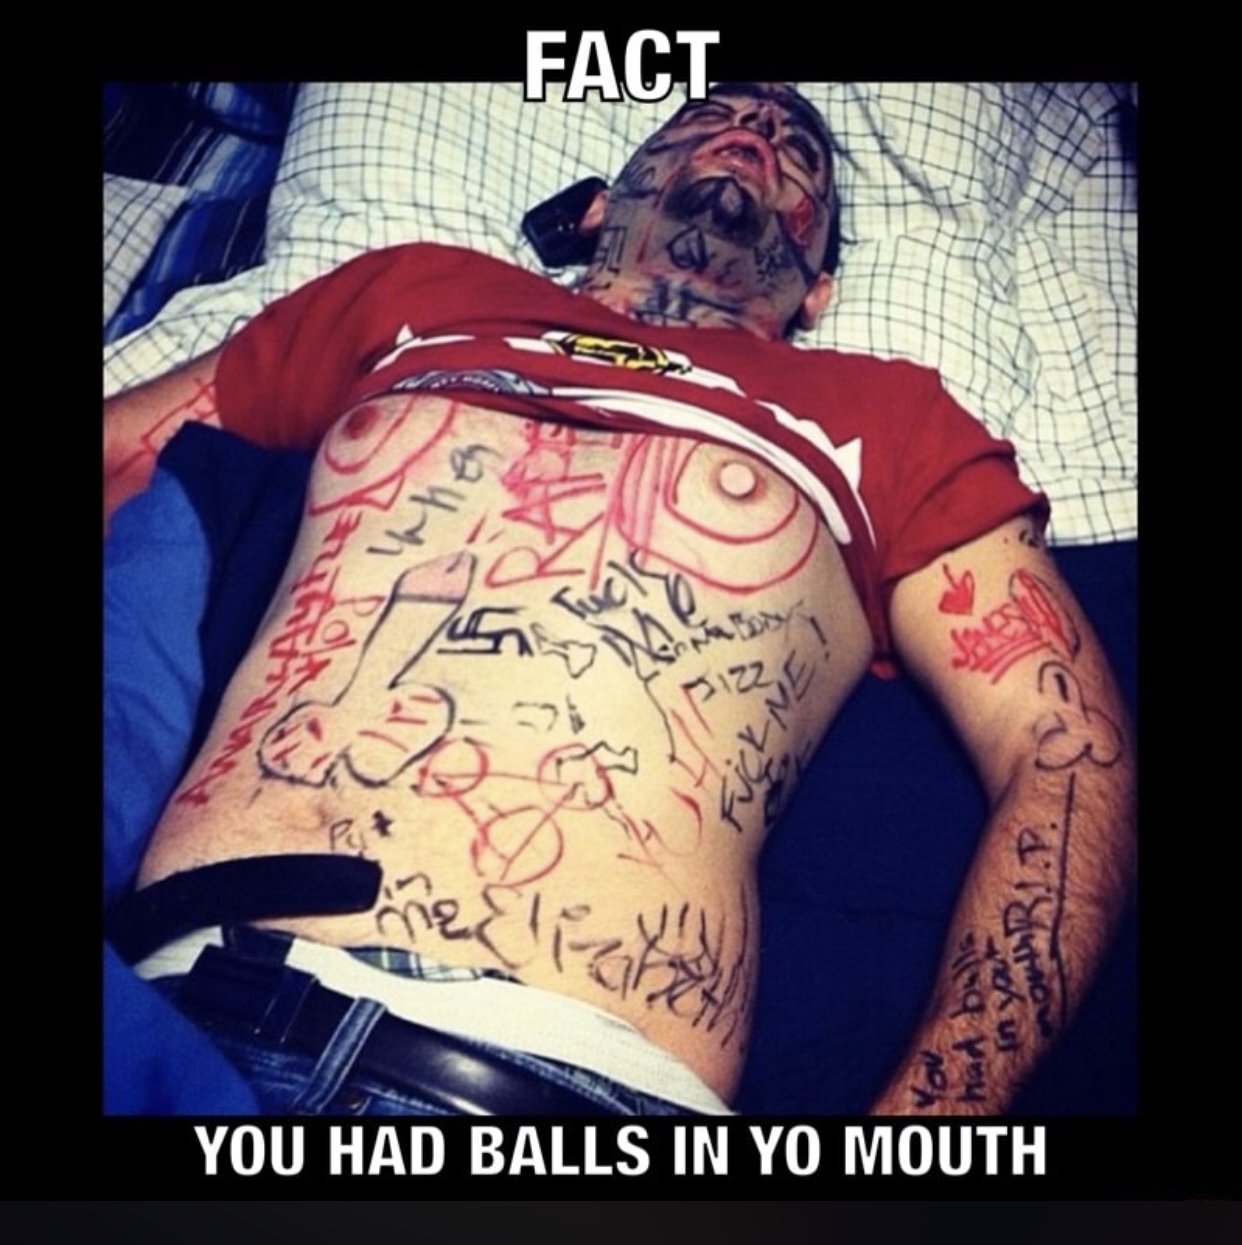 tattoo - Fact 31226 sity You Had Balls In Yo Mouth